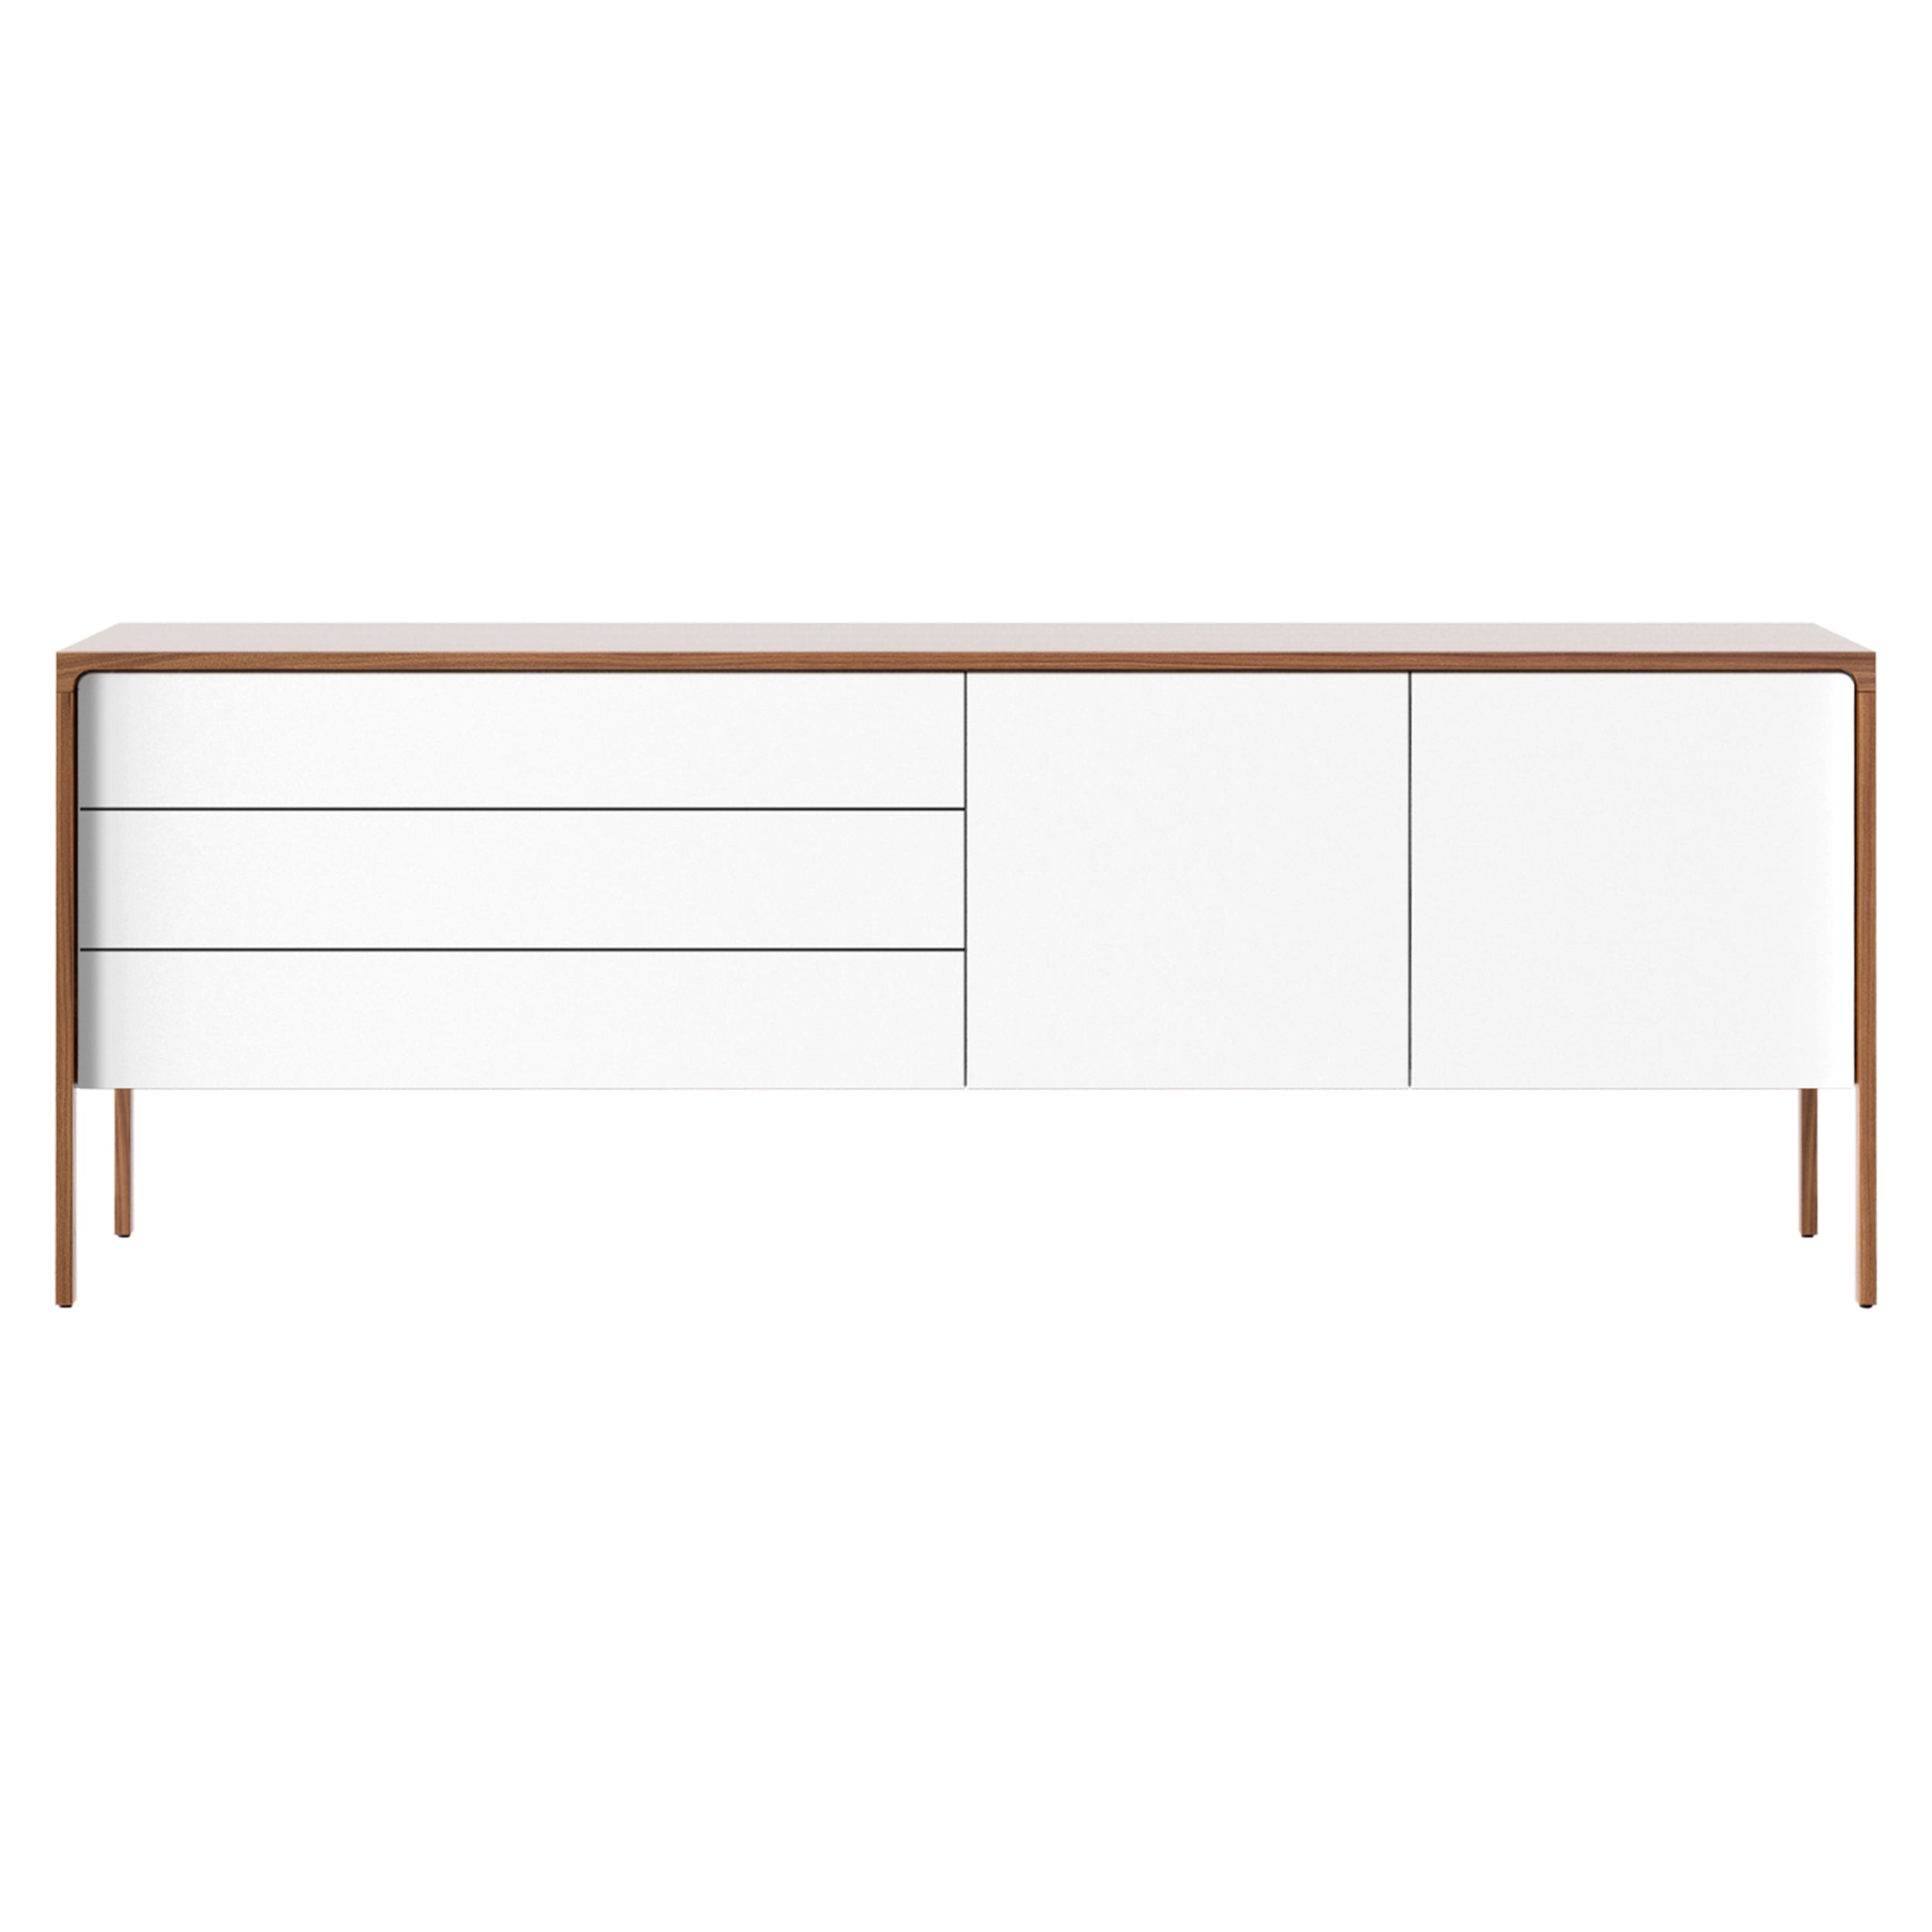 Tactile Sideboard: TAC216 + White Texturised Lacquered + Super-Matt Walnut